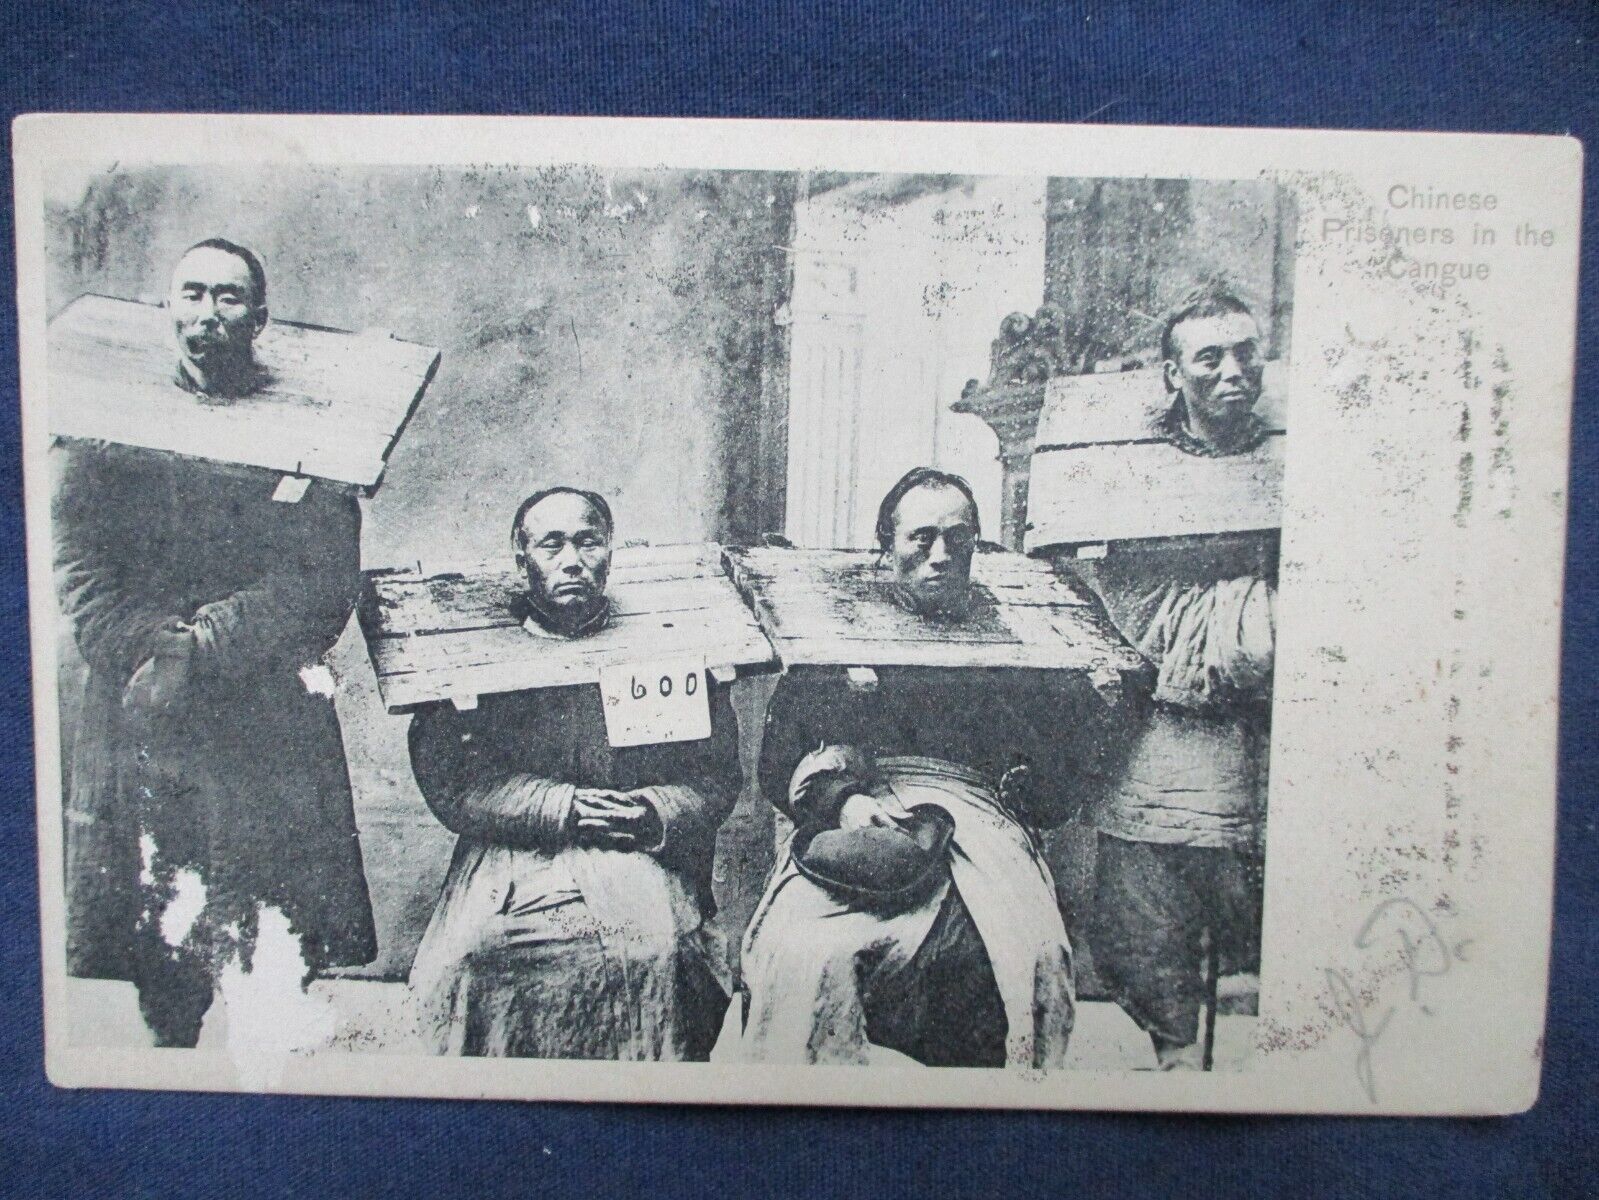 1900s Hong Kong Chinese Prisoners in Cangue Postcard